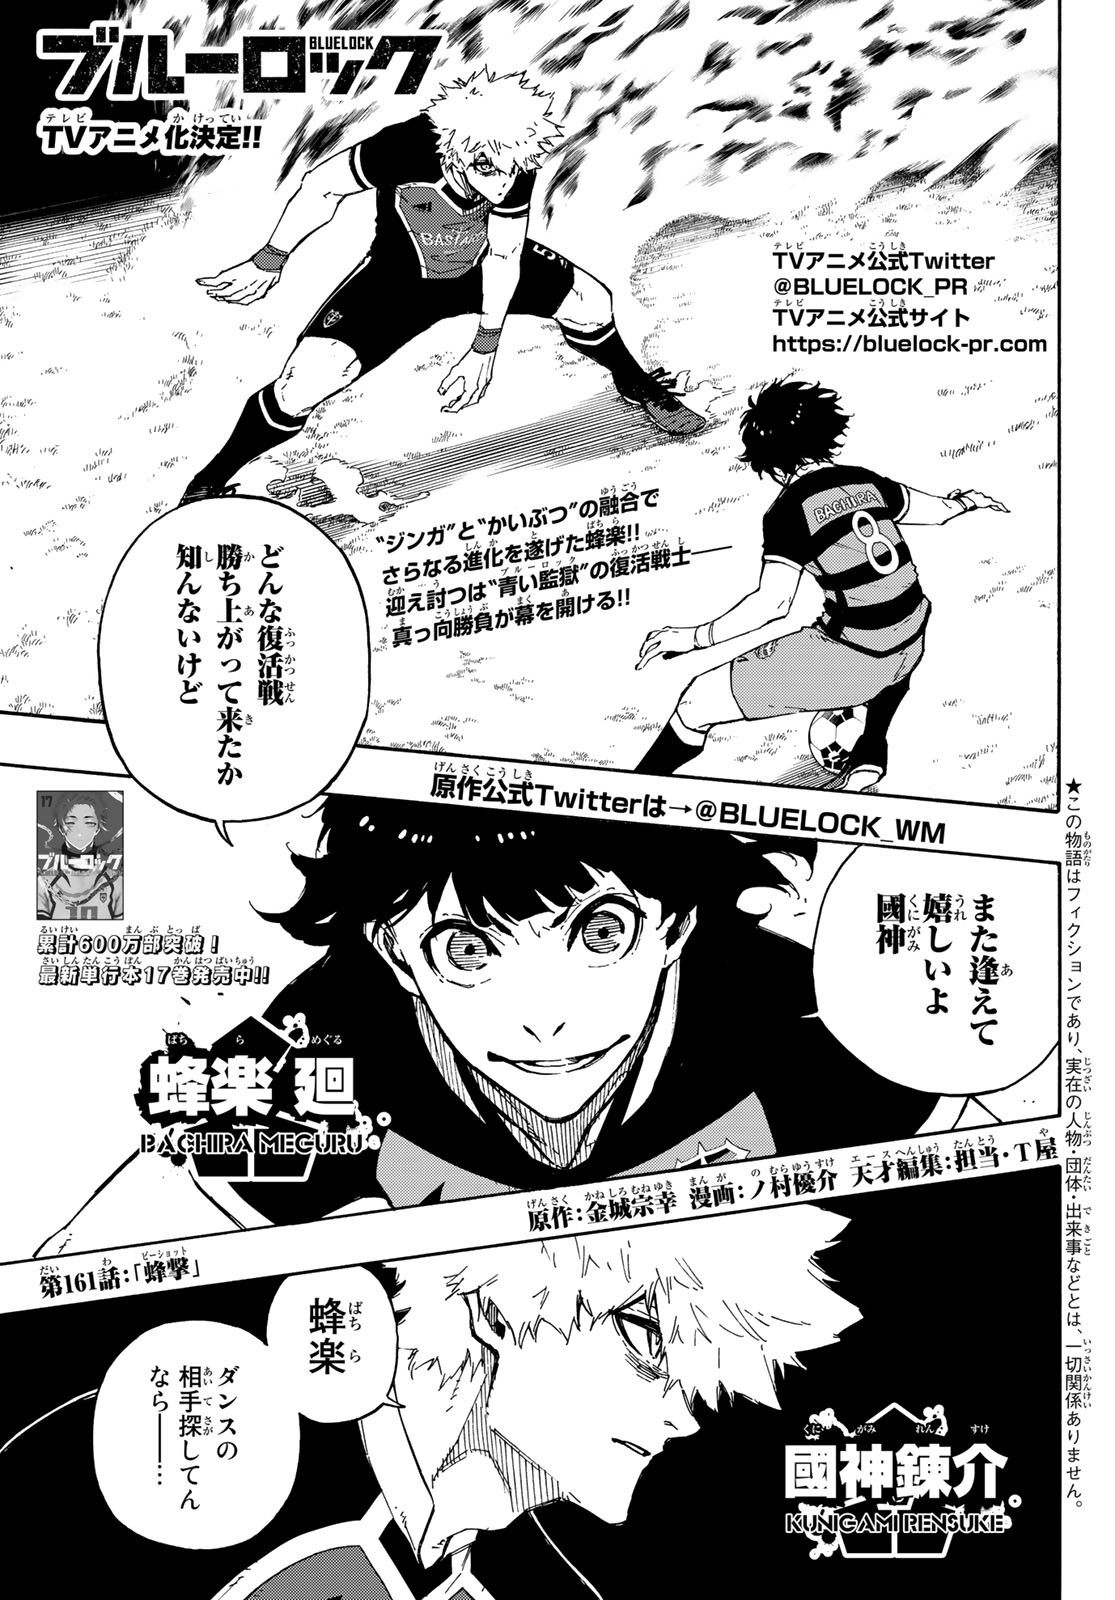 Blue Lock Chapter 236 Spoilers & Raw Scans: Hiori's Second Strike!